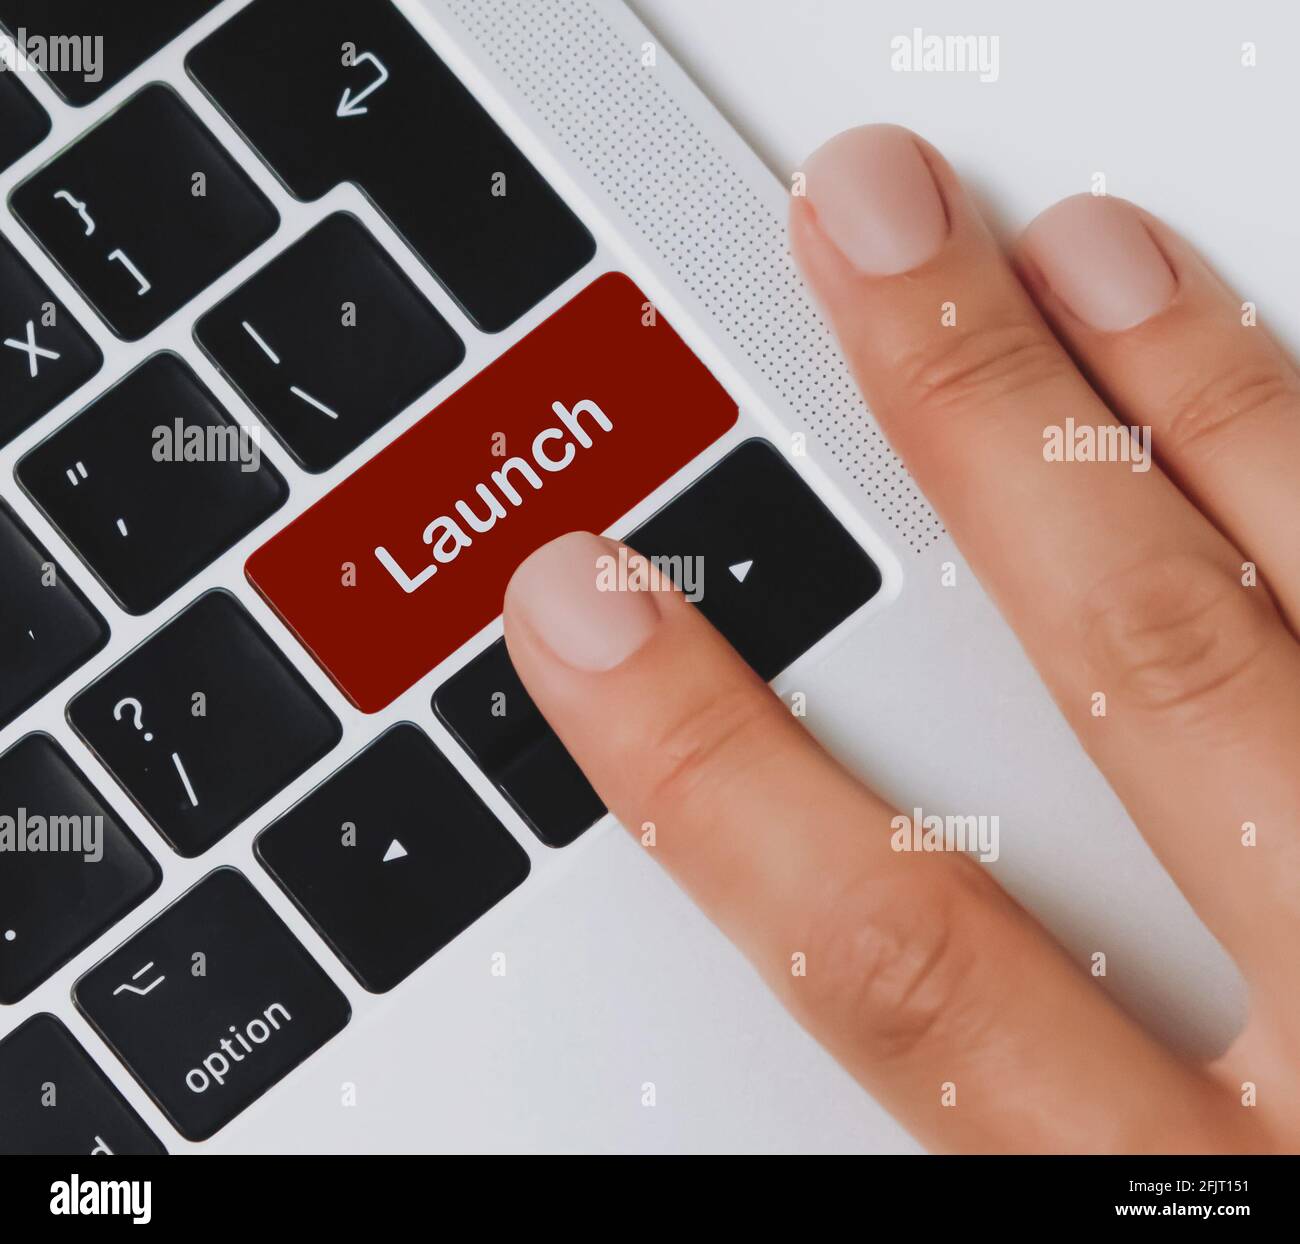 Person's fingers about to press 'Launch' key on a black laptop keyboard on an office desk. Press to launch. Stock Photo